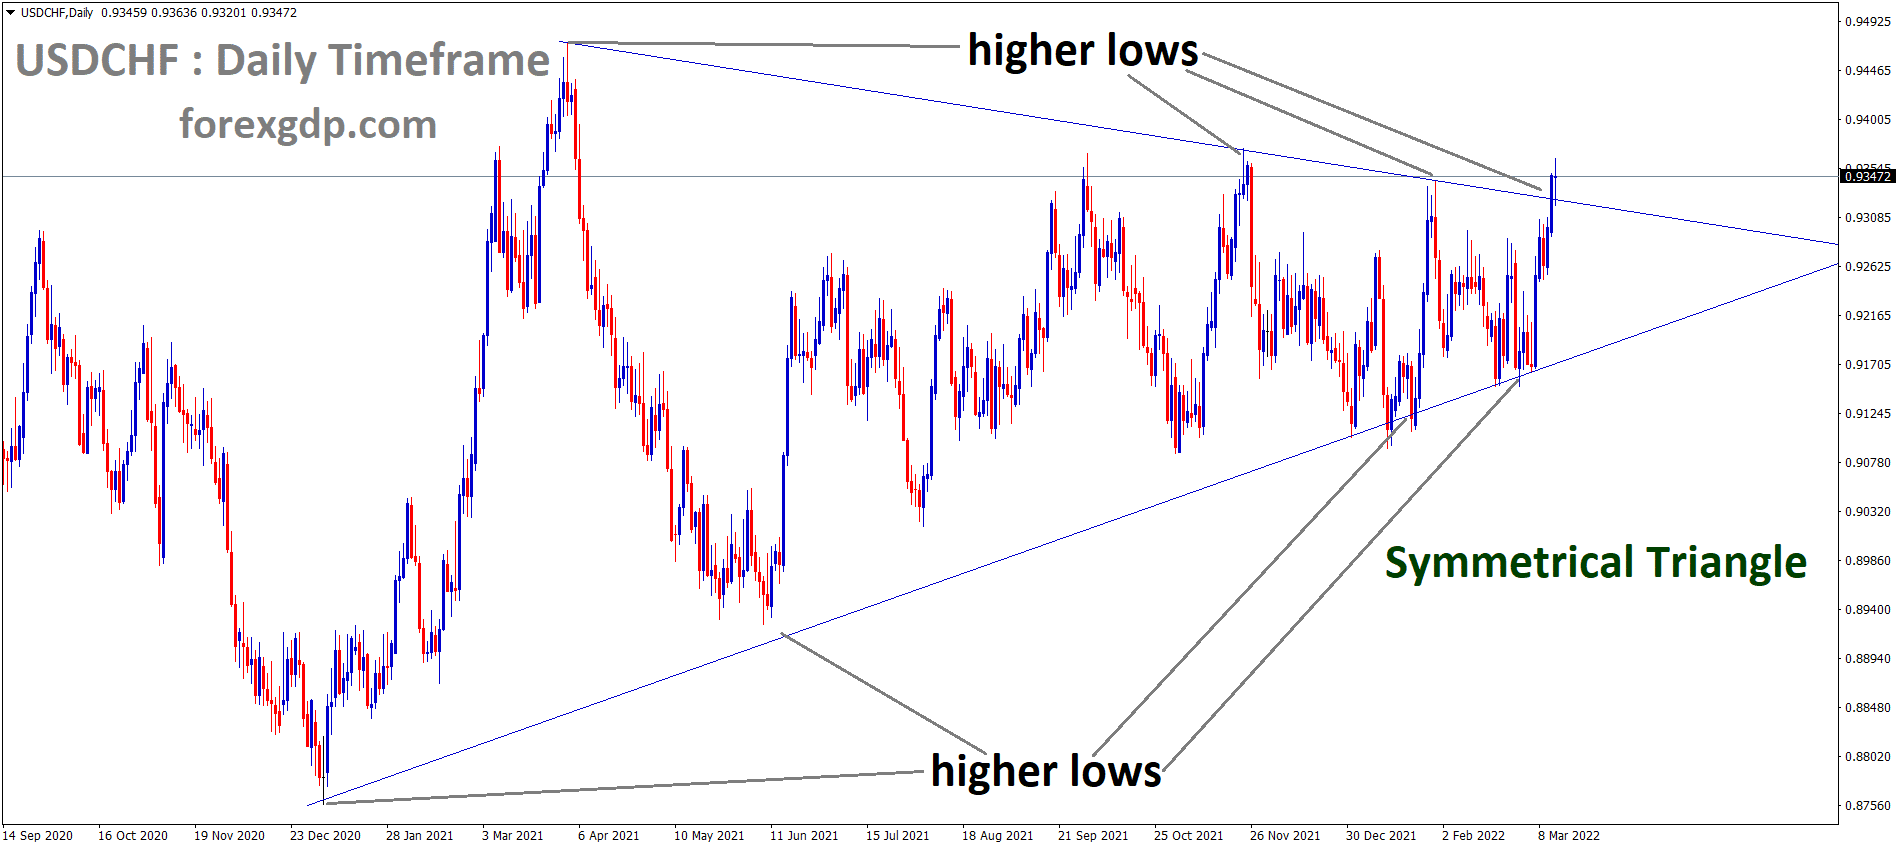 USDCHF is moving in the Symmetrical triangle pattern and the market has reached the Top area of the pattern 1